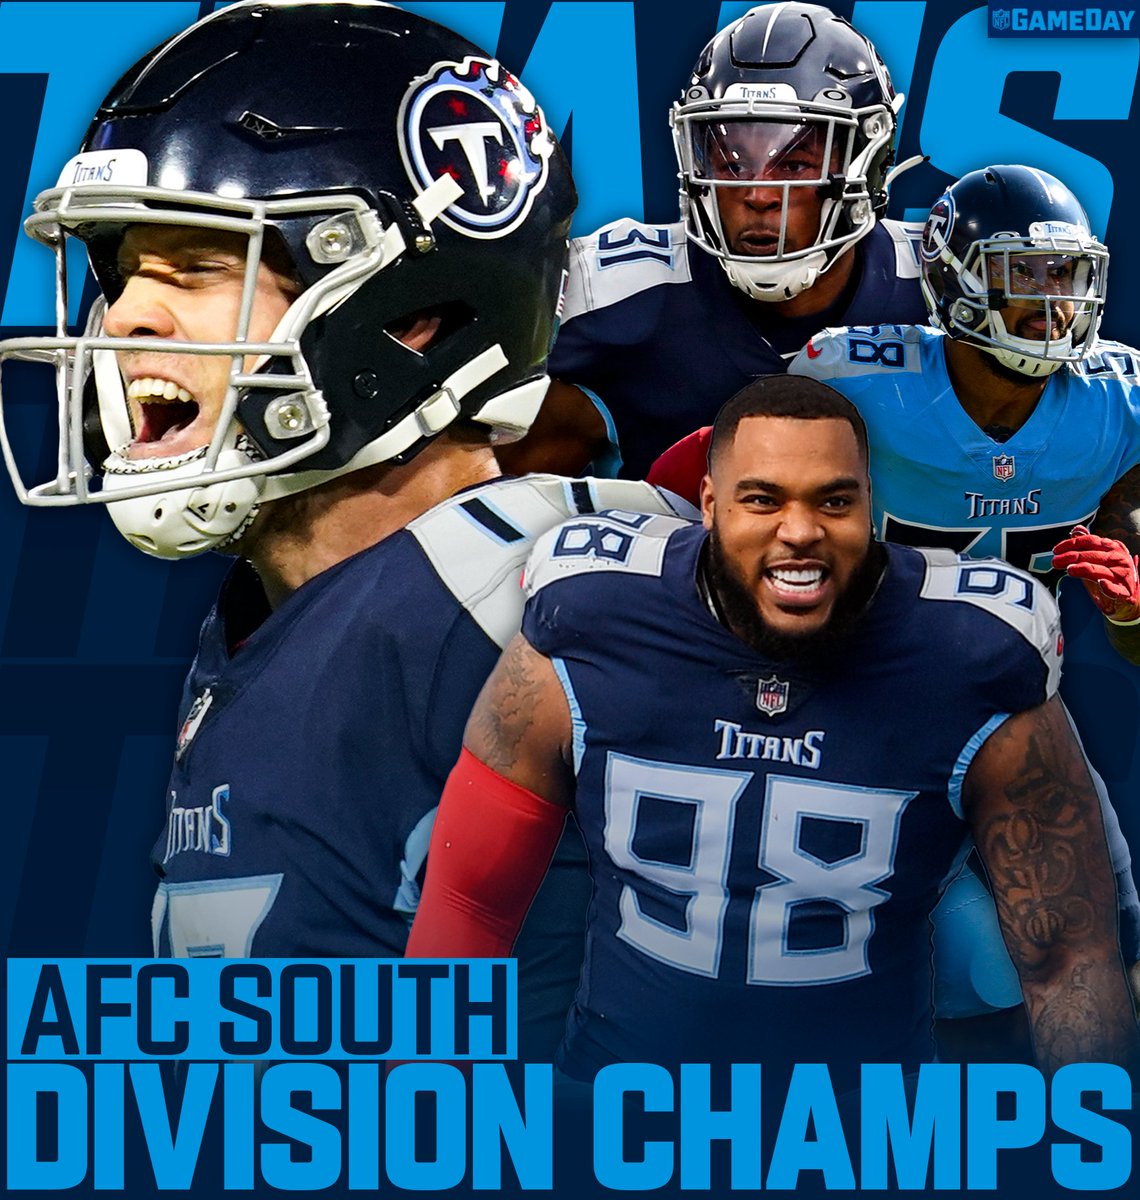 The AFC South 👑 goes to the @Titans @GrindSimmons94 | @KevinByard | #Titans